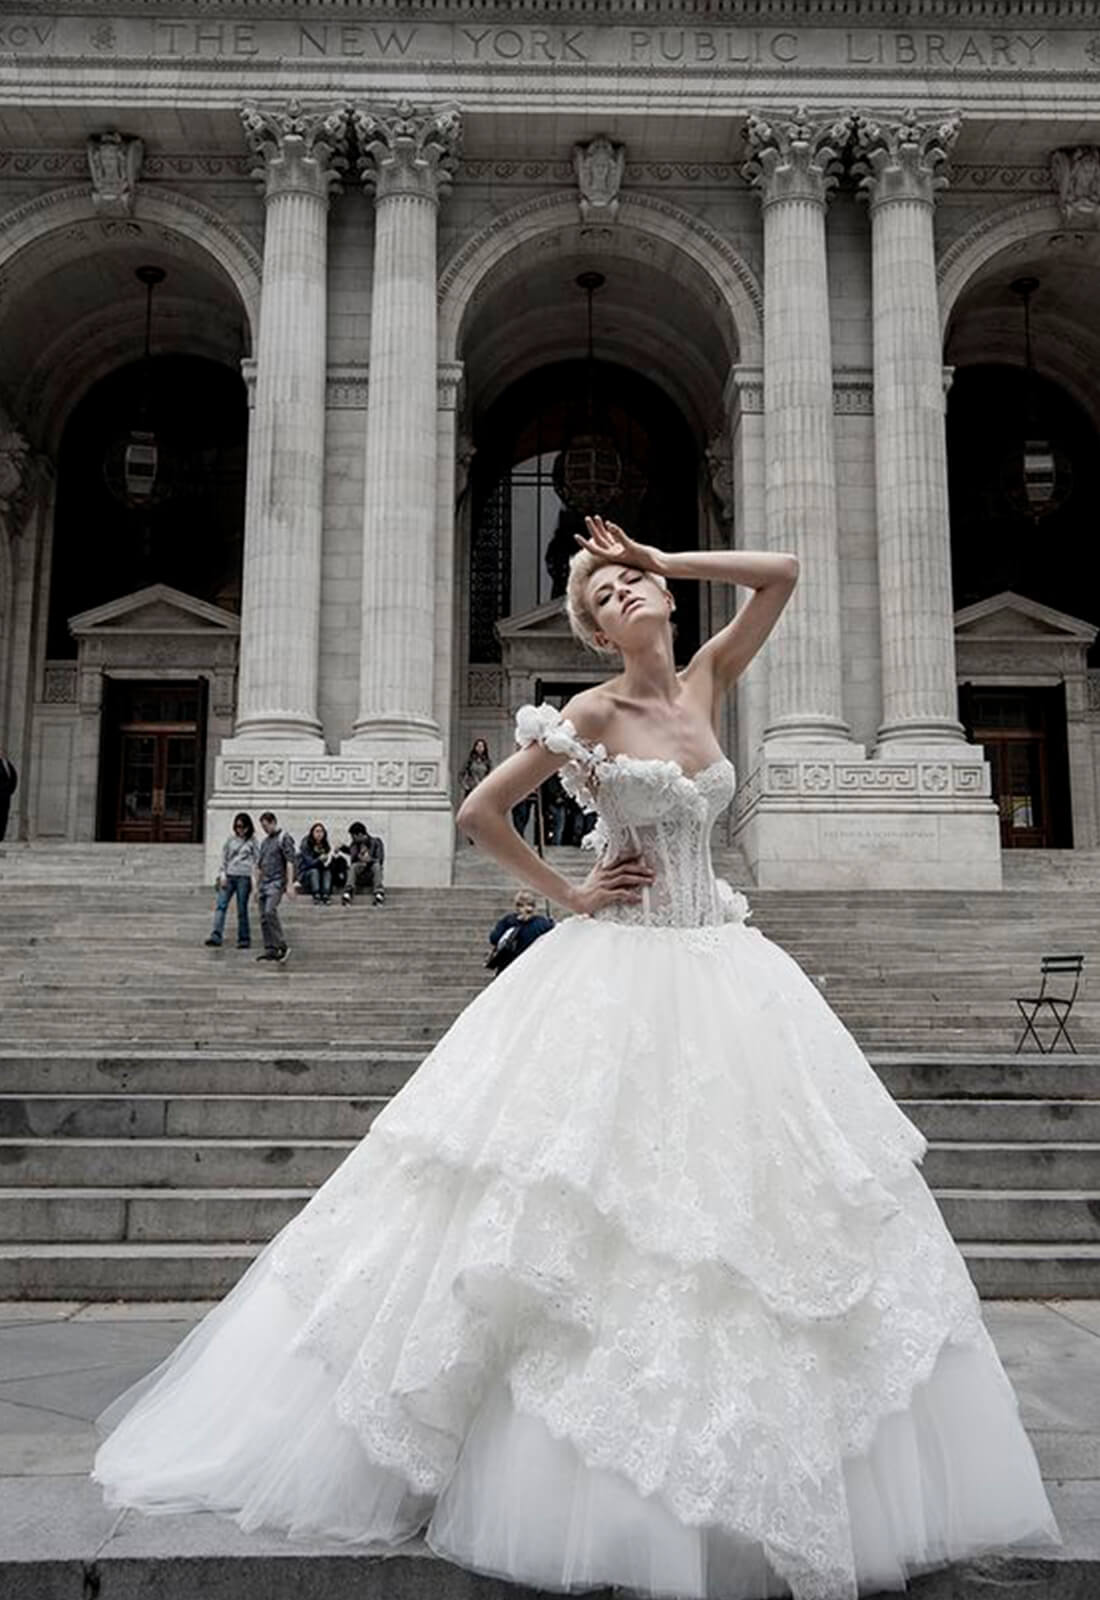 The Most Expensive Kleinfeld Bridal Dress EVER Was…